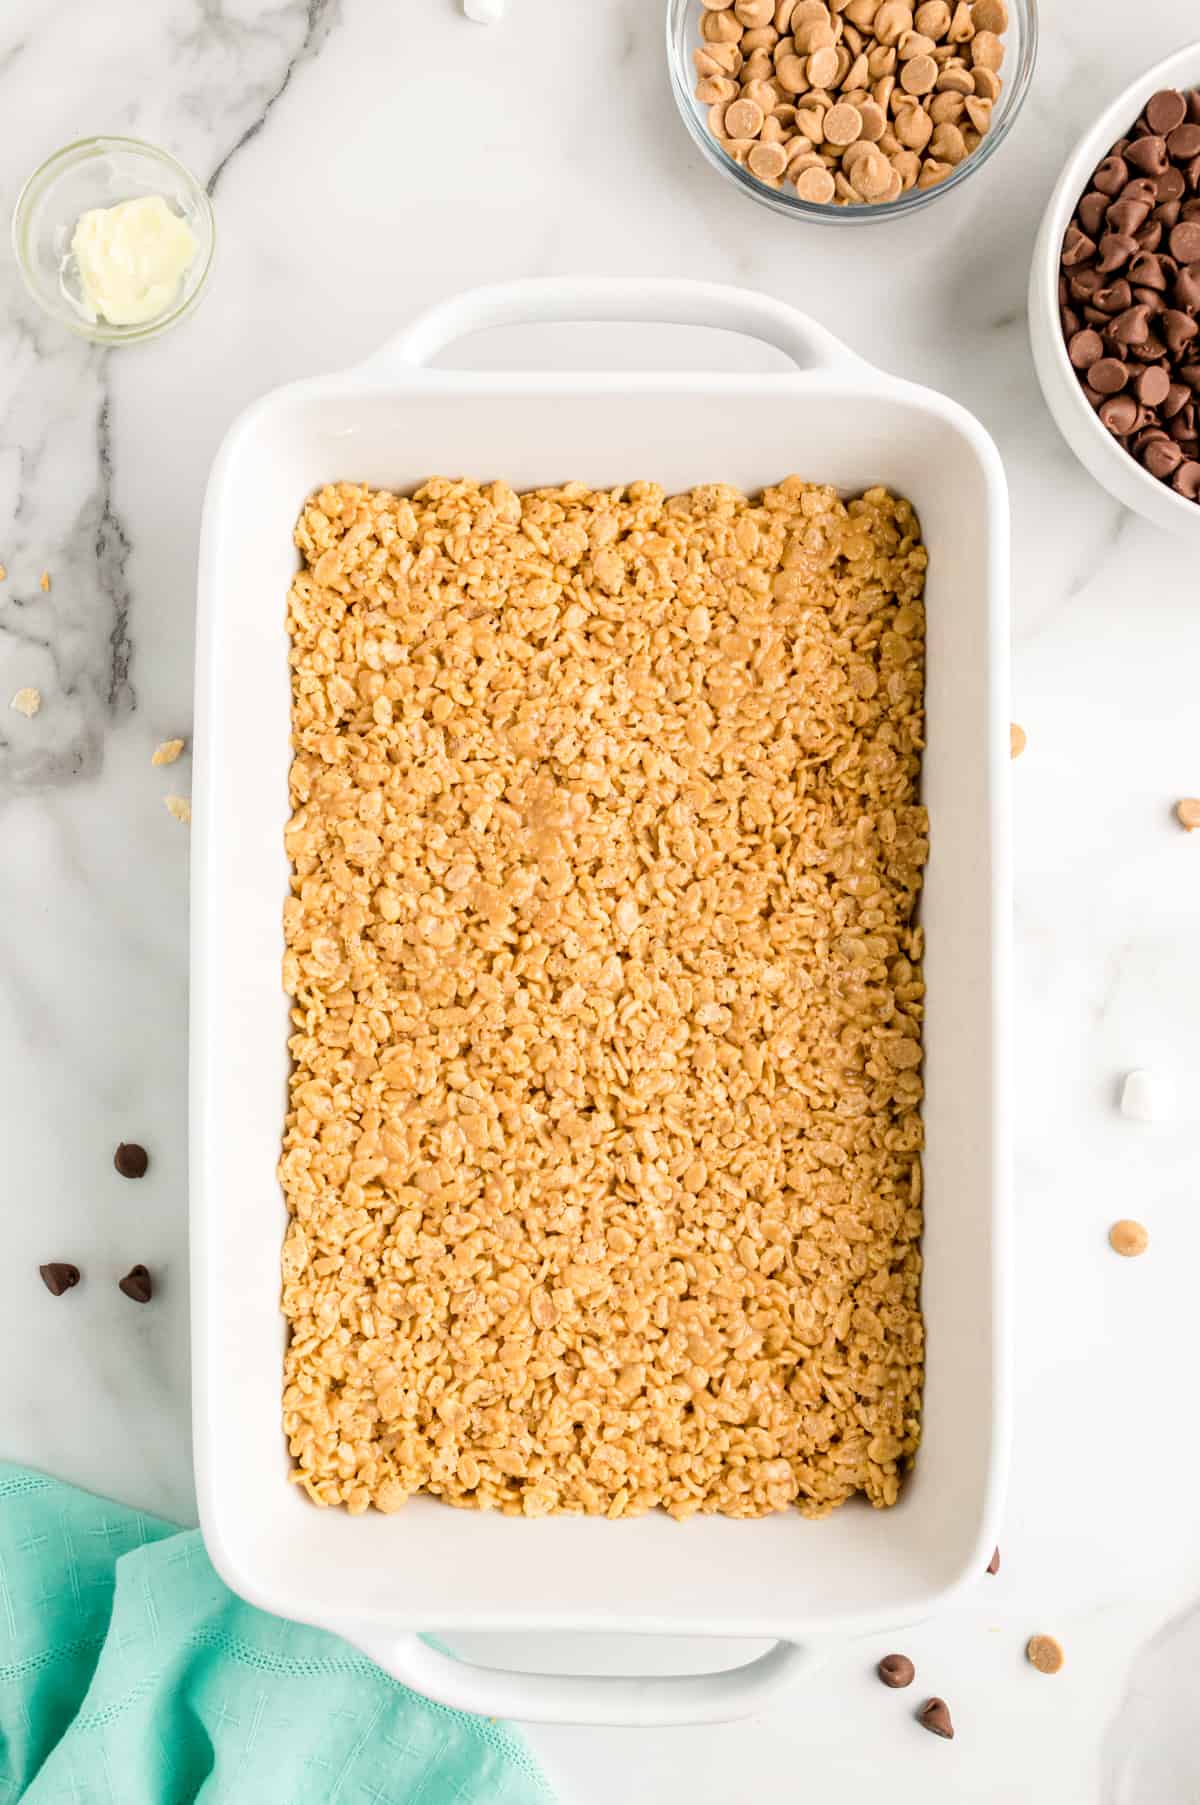 Peanut butter rice cereal mixture pressed into white 9 by 13 inch baking pan.